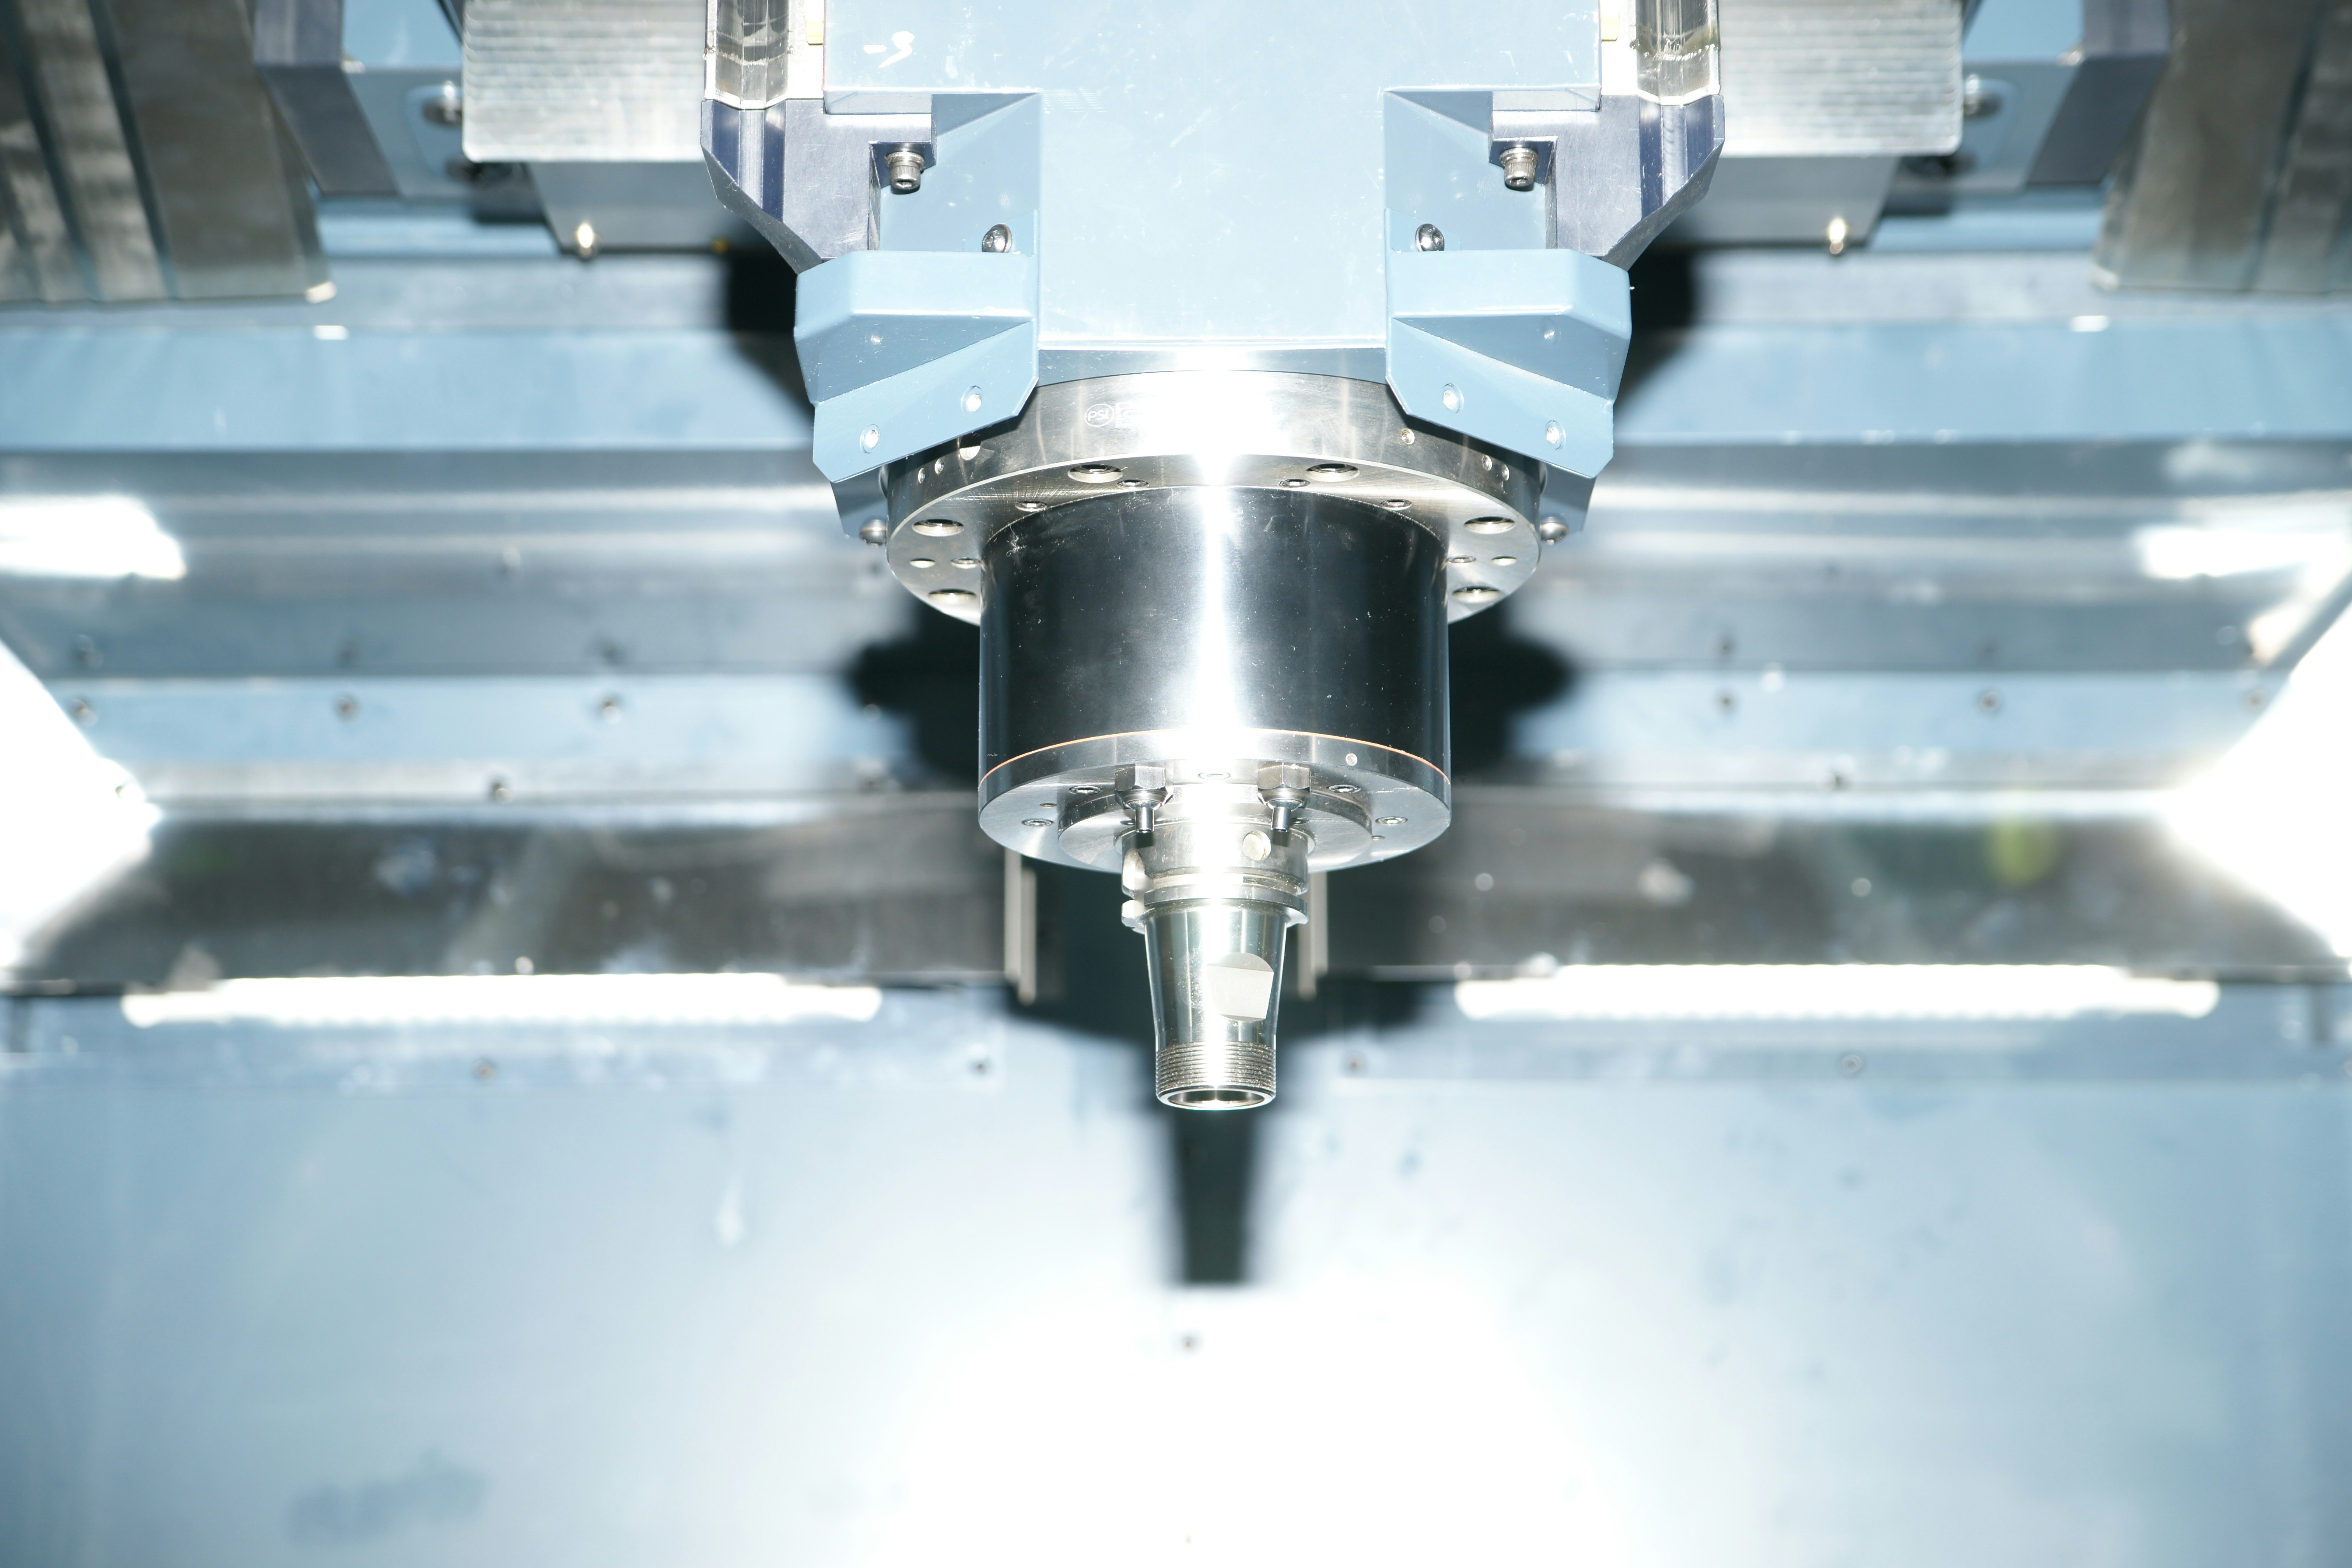 Mini CNC milling machine achieving precision and accuracy in metal fabrication